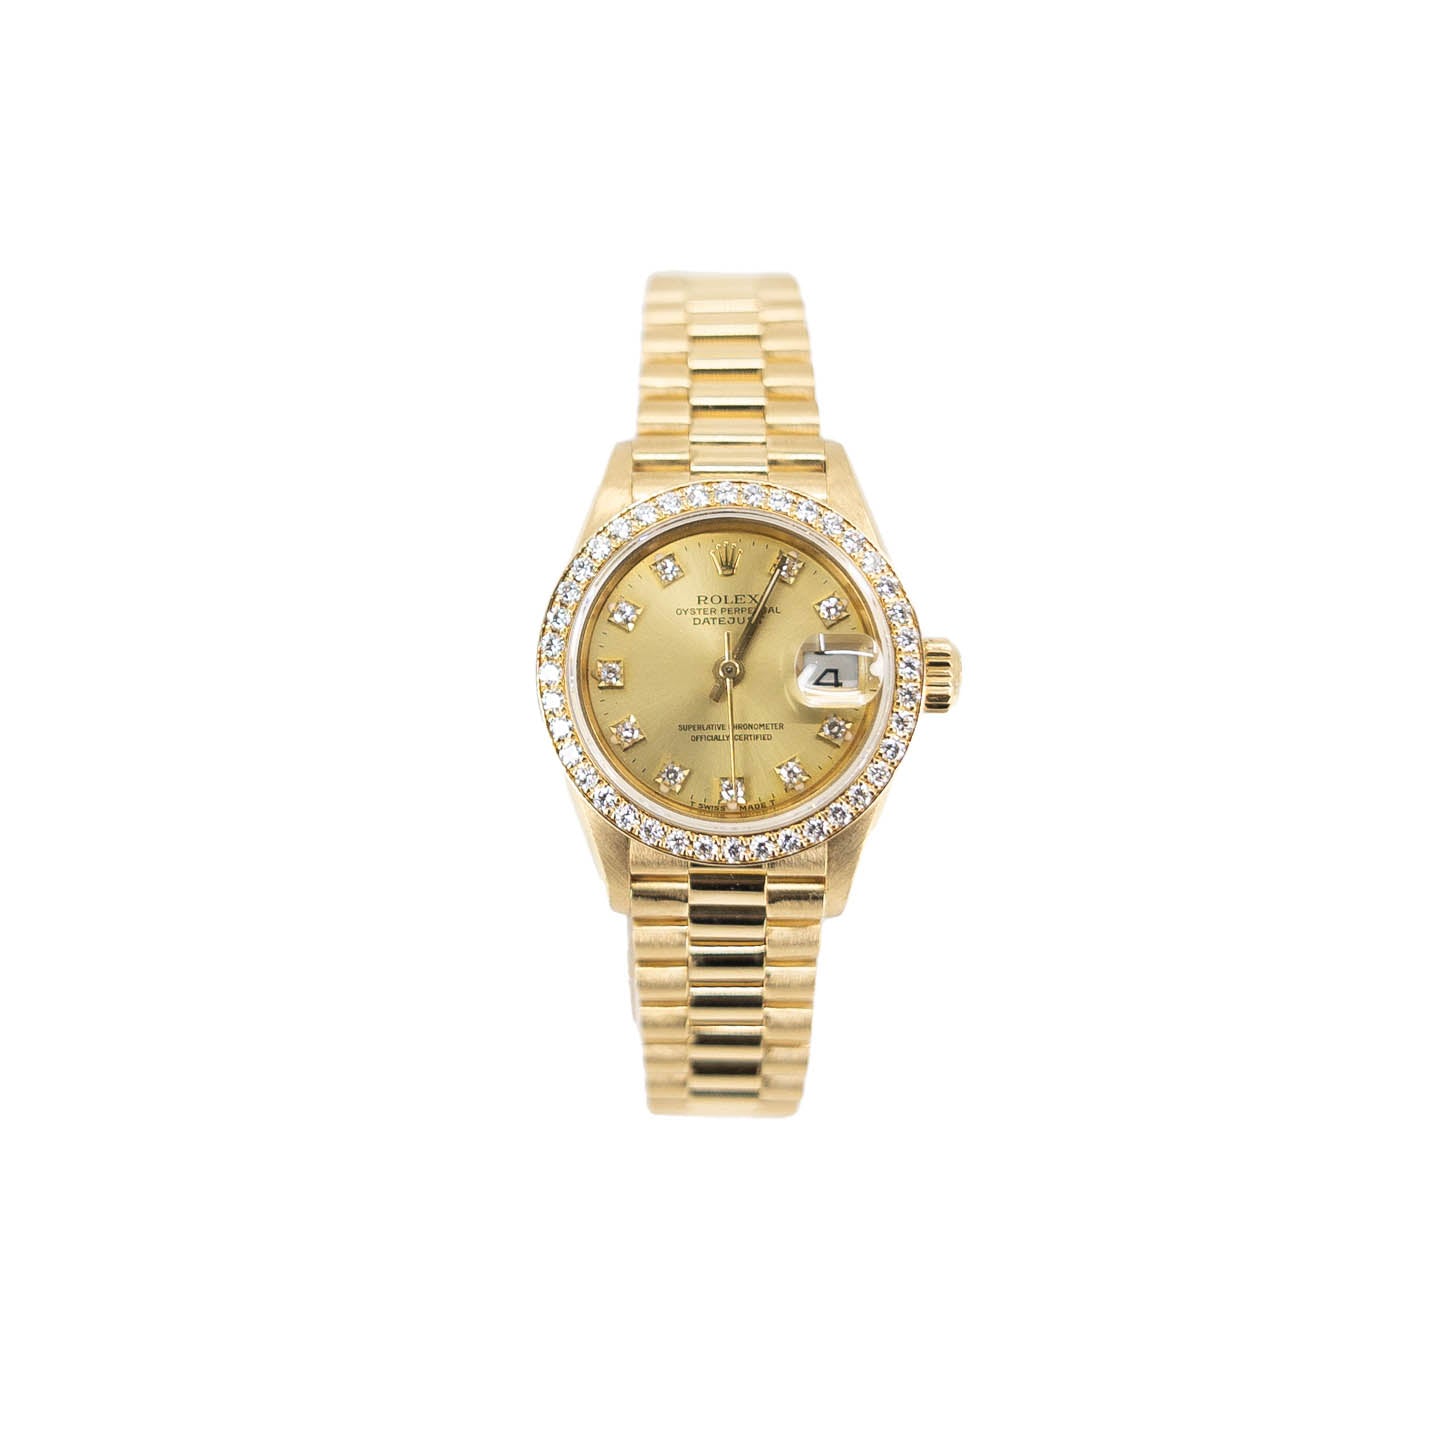 Rolex Lady Datejust 18K Gold Diamond Bezel and Dial 26mm